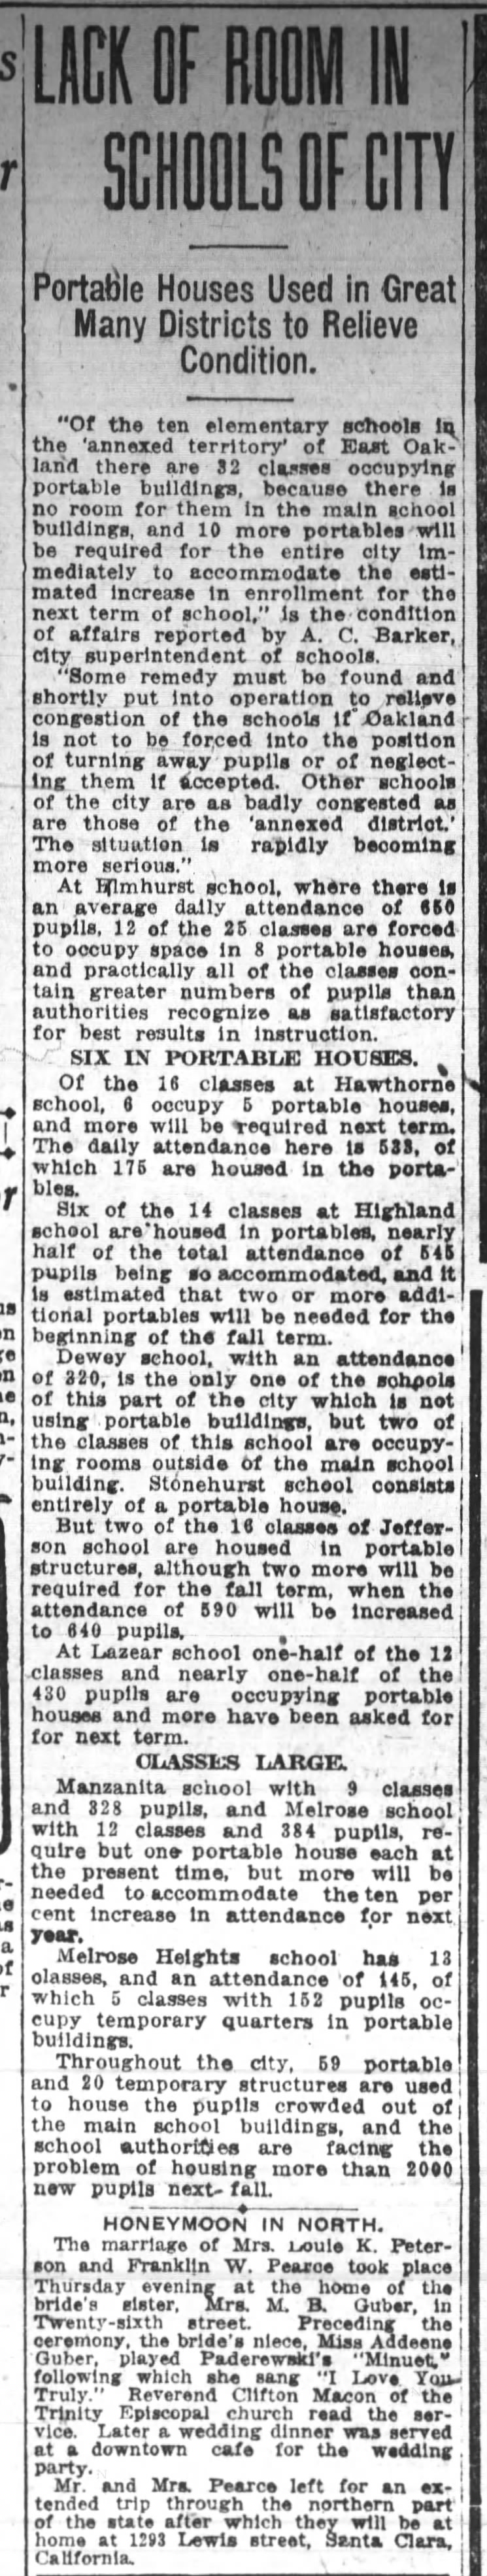 Lack of Room in Schools of City - Apr 16, 1916.